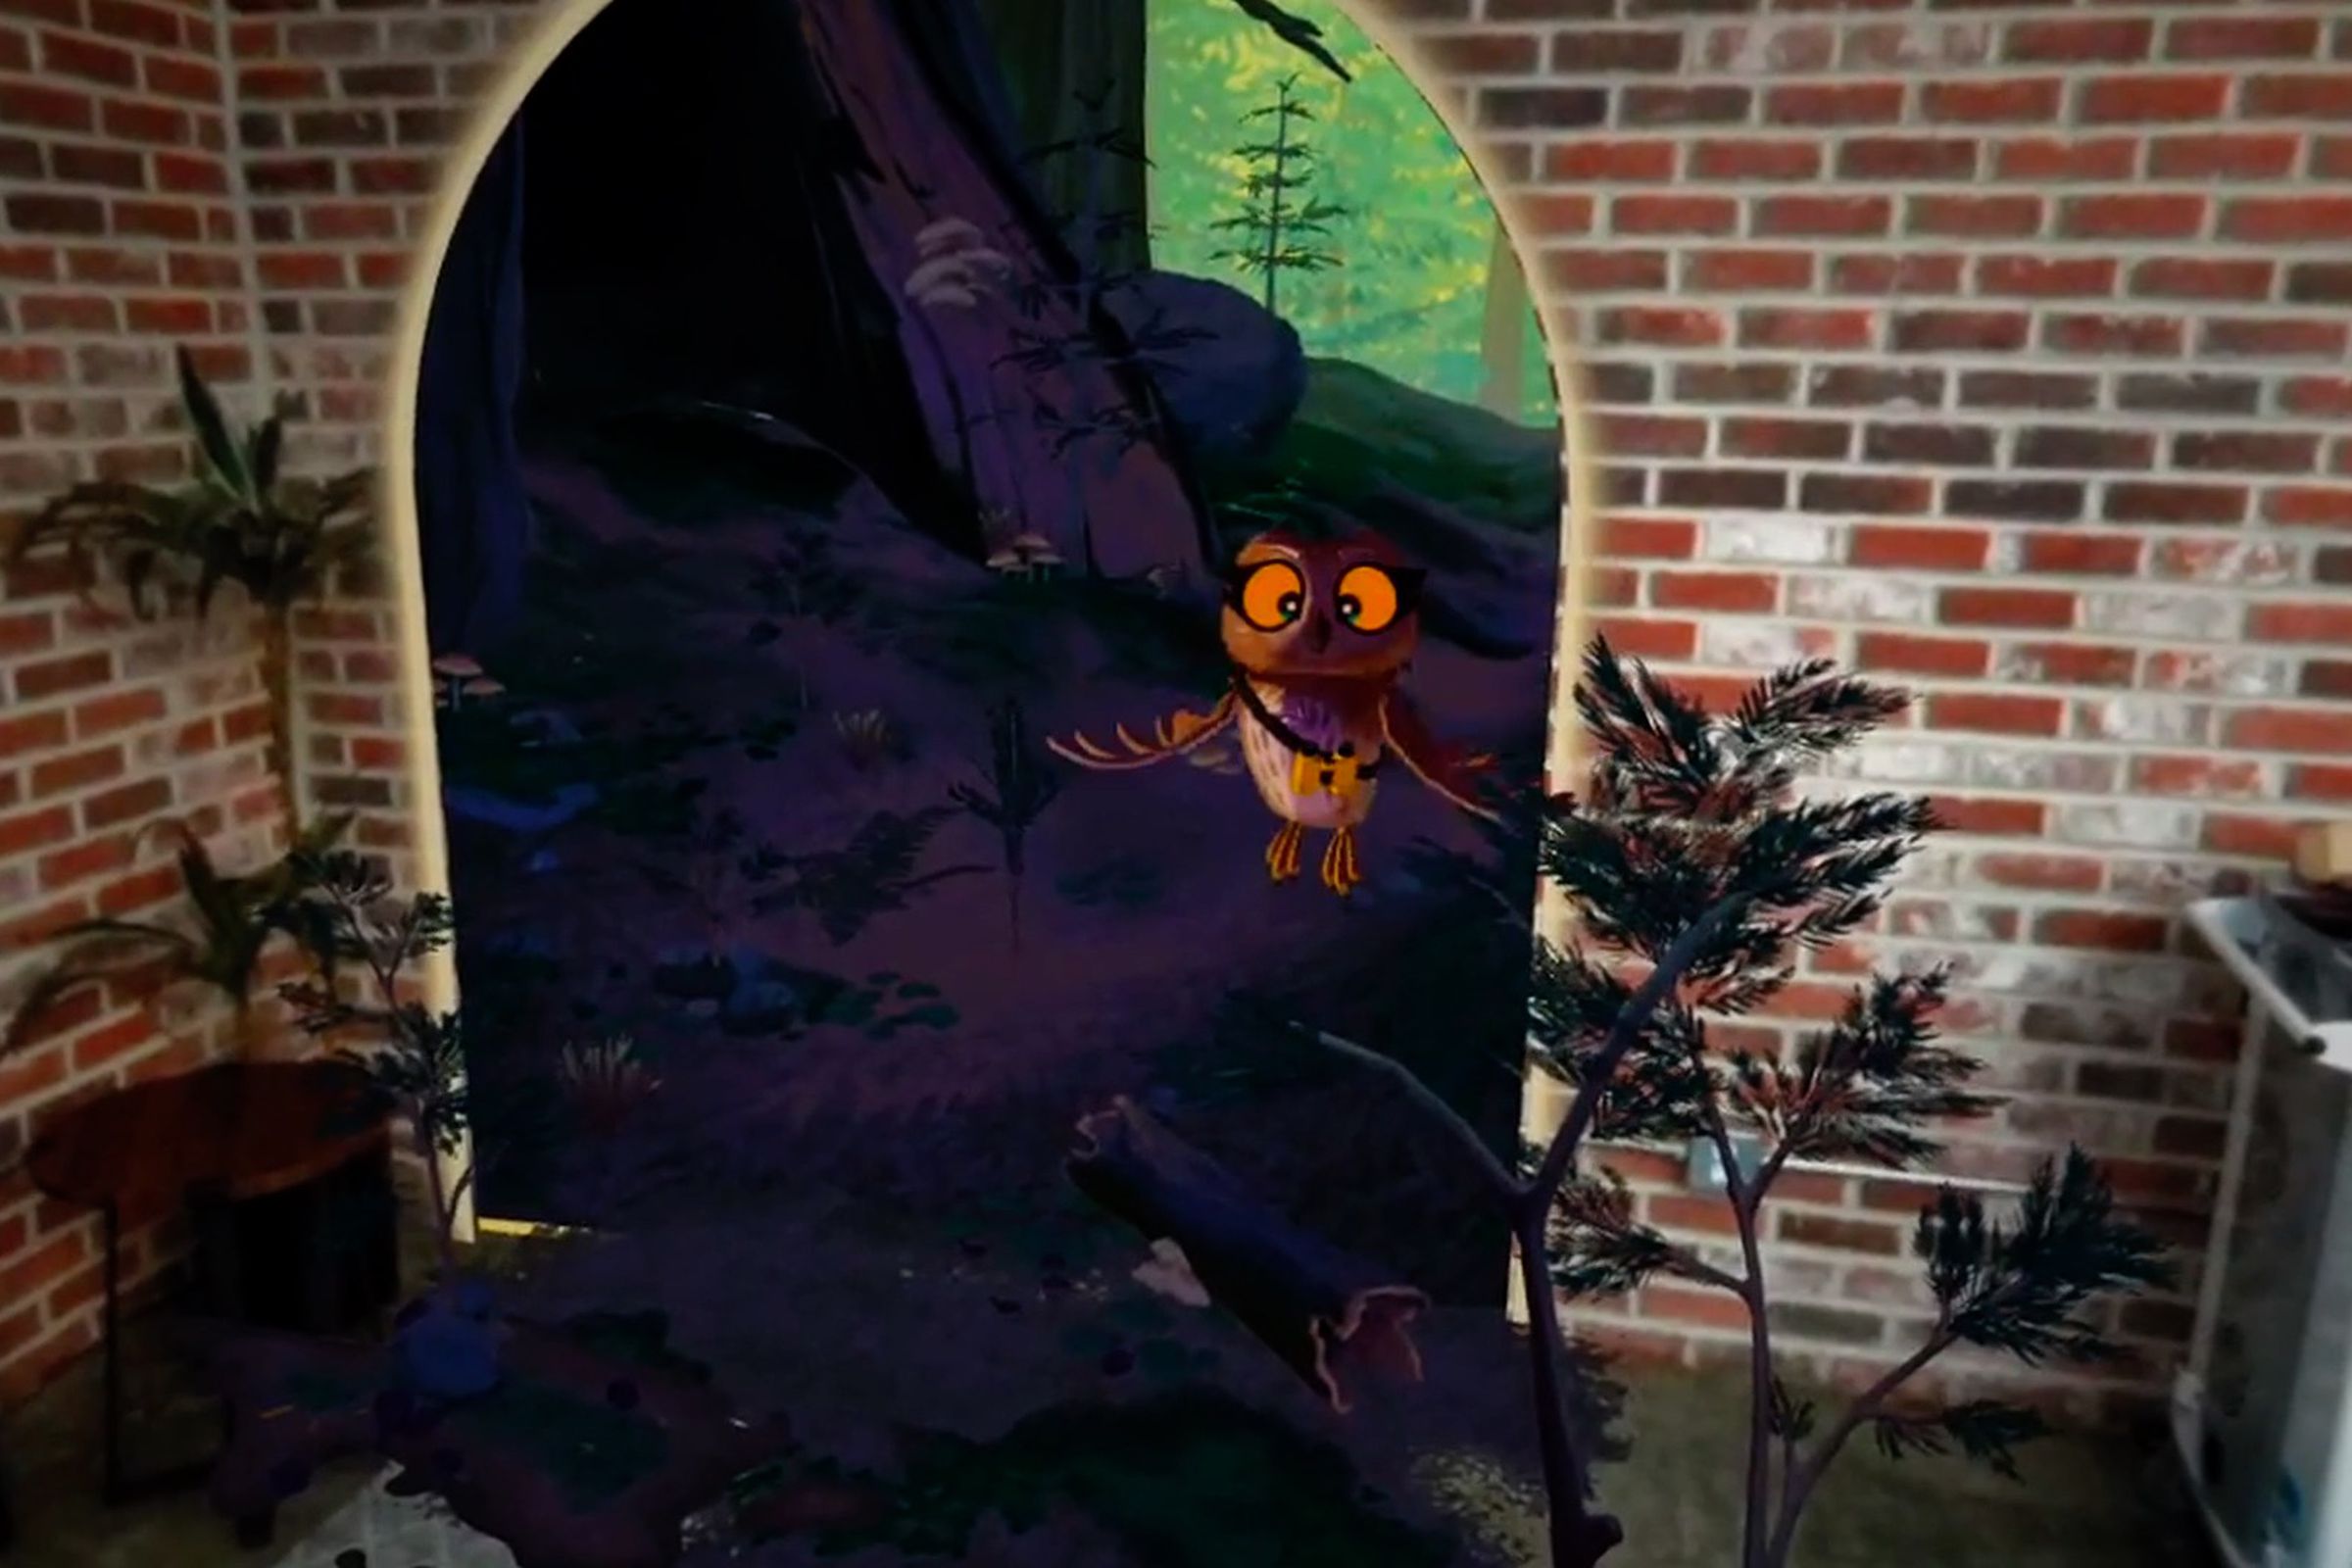 An image of the “Wol,” Niantic’s experience. A virtual owl flies through a portal that leads into a redwood forest, which is displayed on a brick wall.